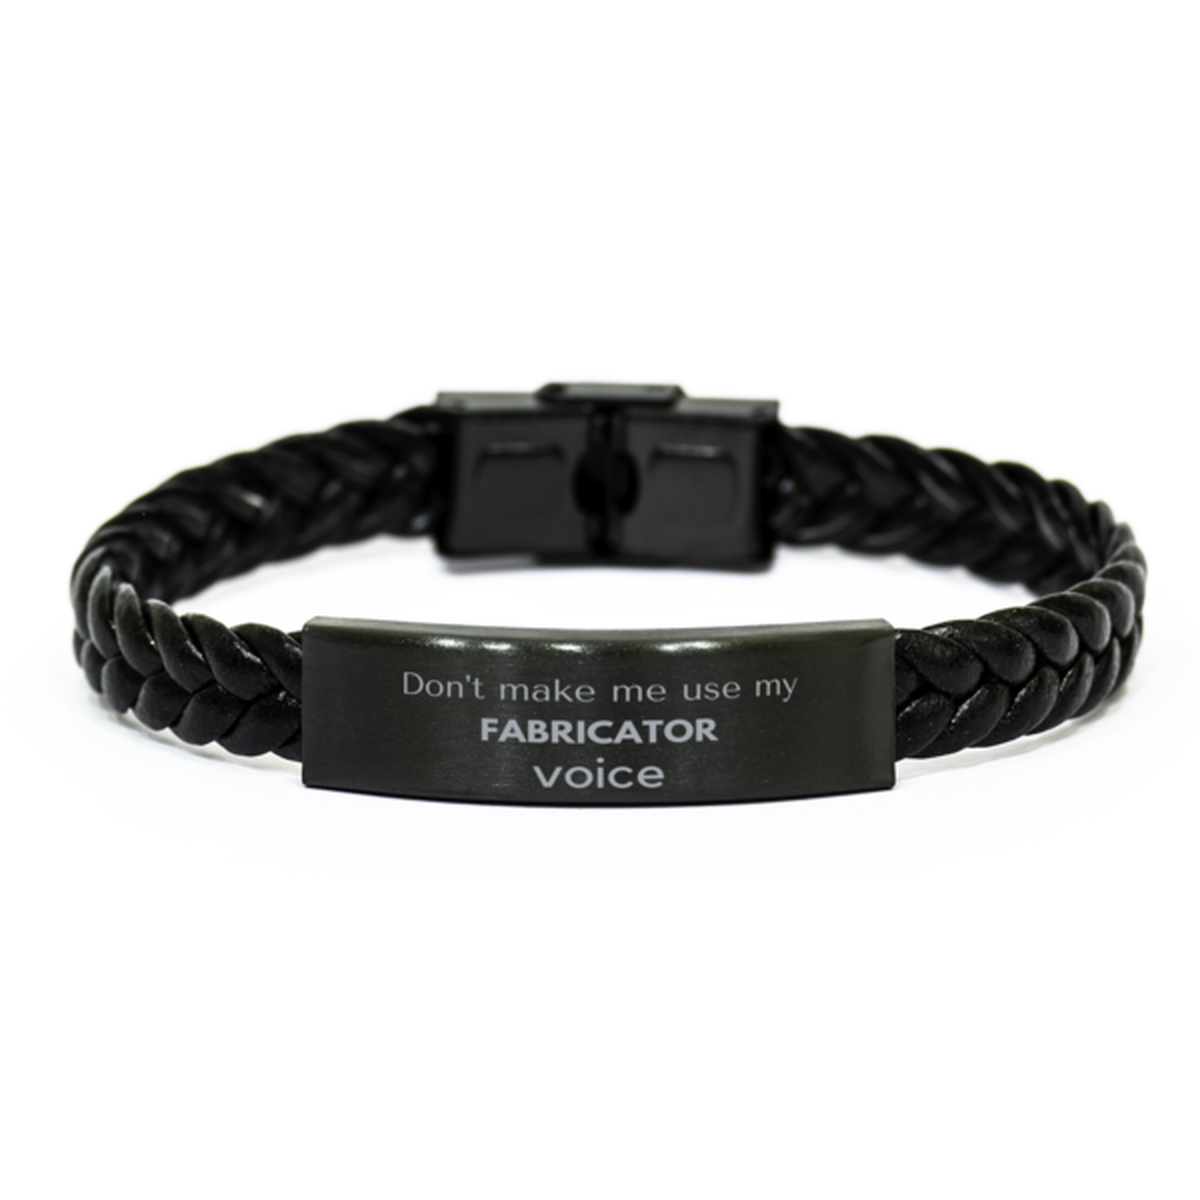 Don't make me use my Fabricator voice, Sarcasm Fabricator Gifts, Christmas Fabricator Braided Leather Bracelet Birthday Unique Gifts For Fabricator Coworkers, Men, Women, Colleague, Friends